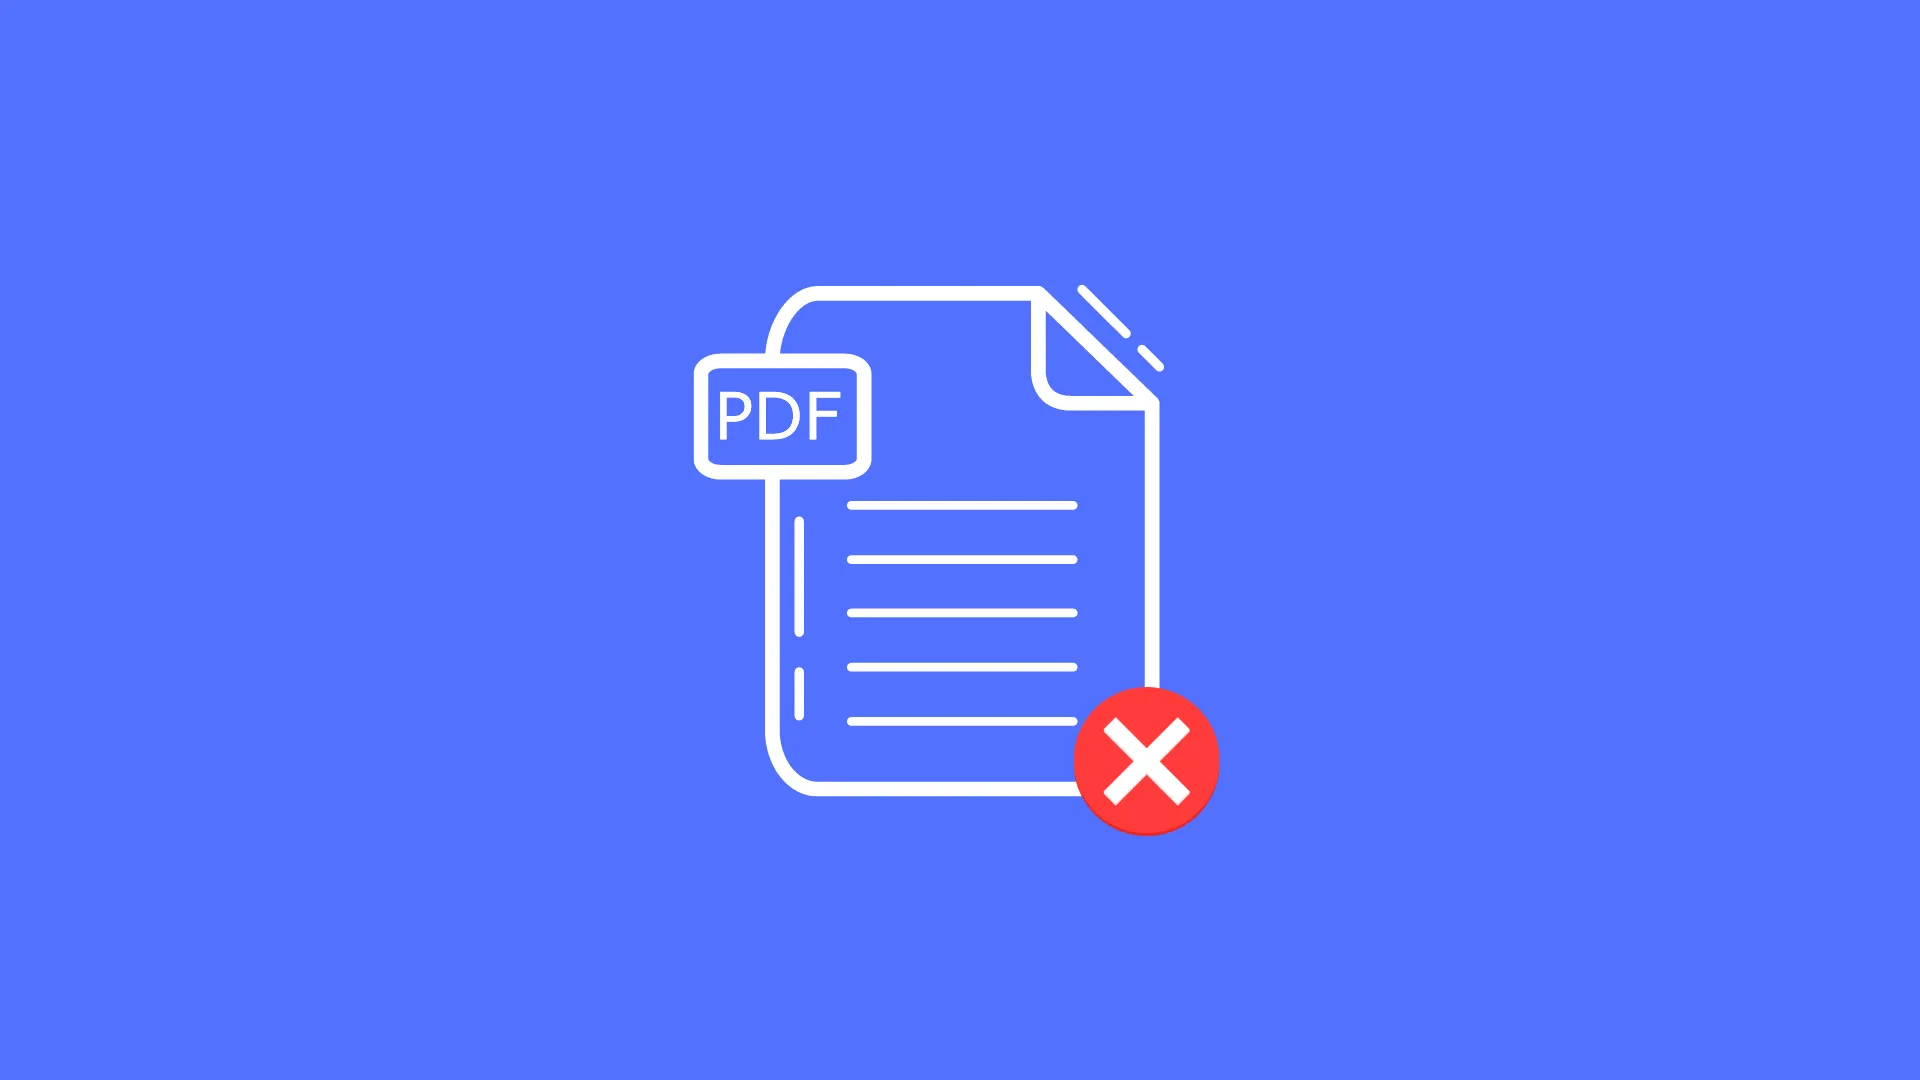 How To Repair Corrupted PDFs And More - Wondershare Repairit Guide